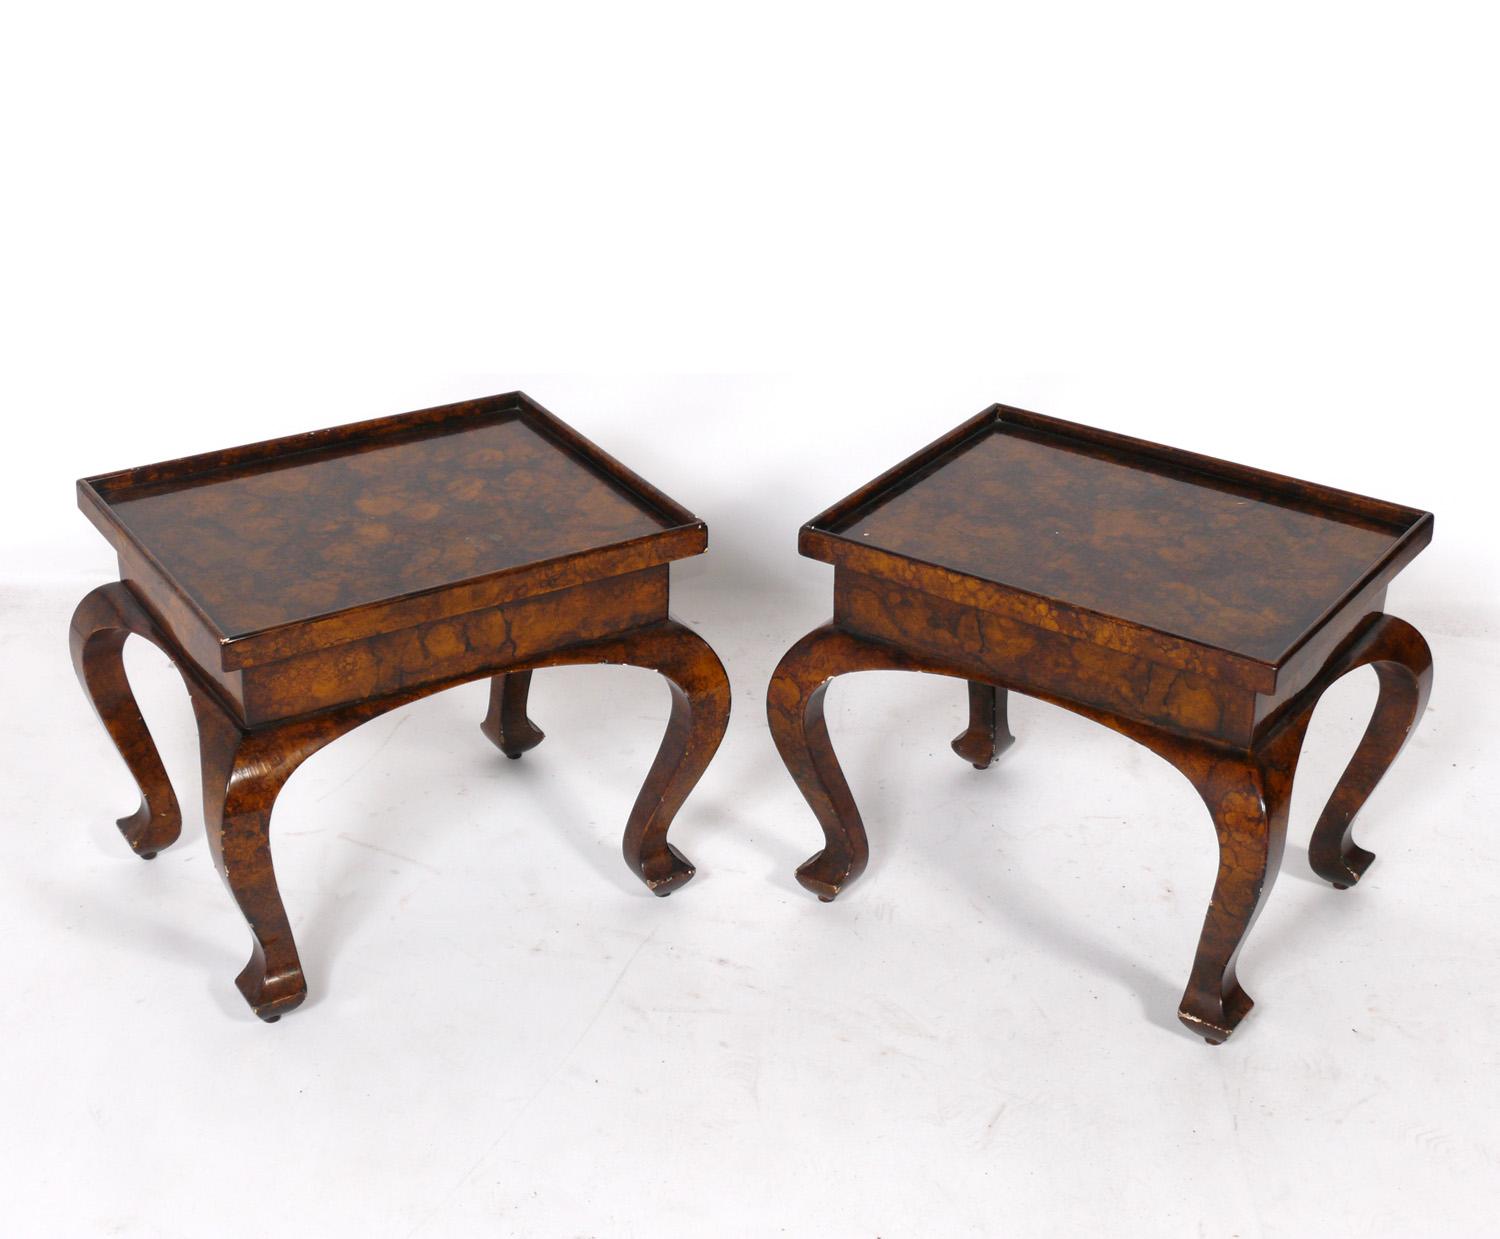 Pair of Petite faux tortoiseshell or oil spot end tables, American, circa 1960s. They are a versatile petite size and can be used as end or side tables, or as night stands, or placed on top of other tables, to elevate and display objects.